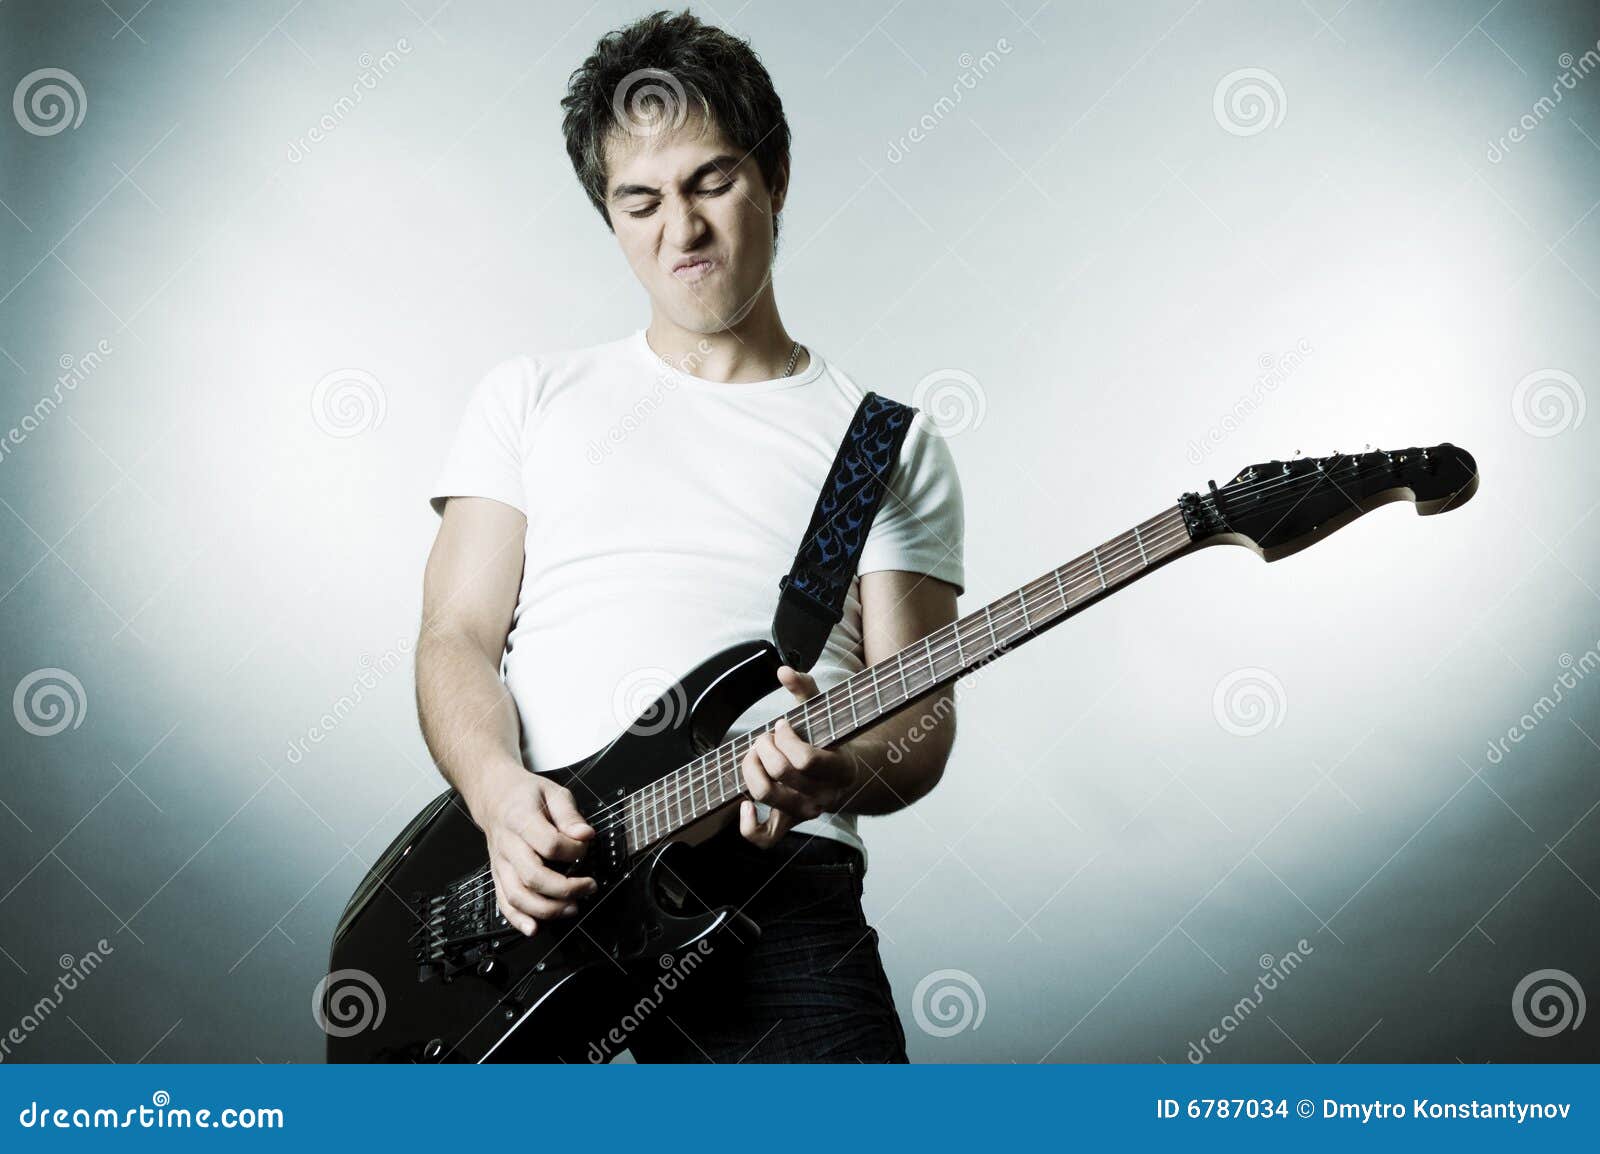 Handsome Man Playing on the Guitar Stock Photo - Image of musician ...